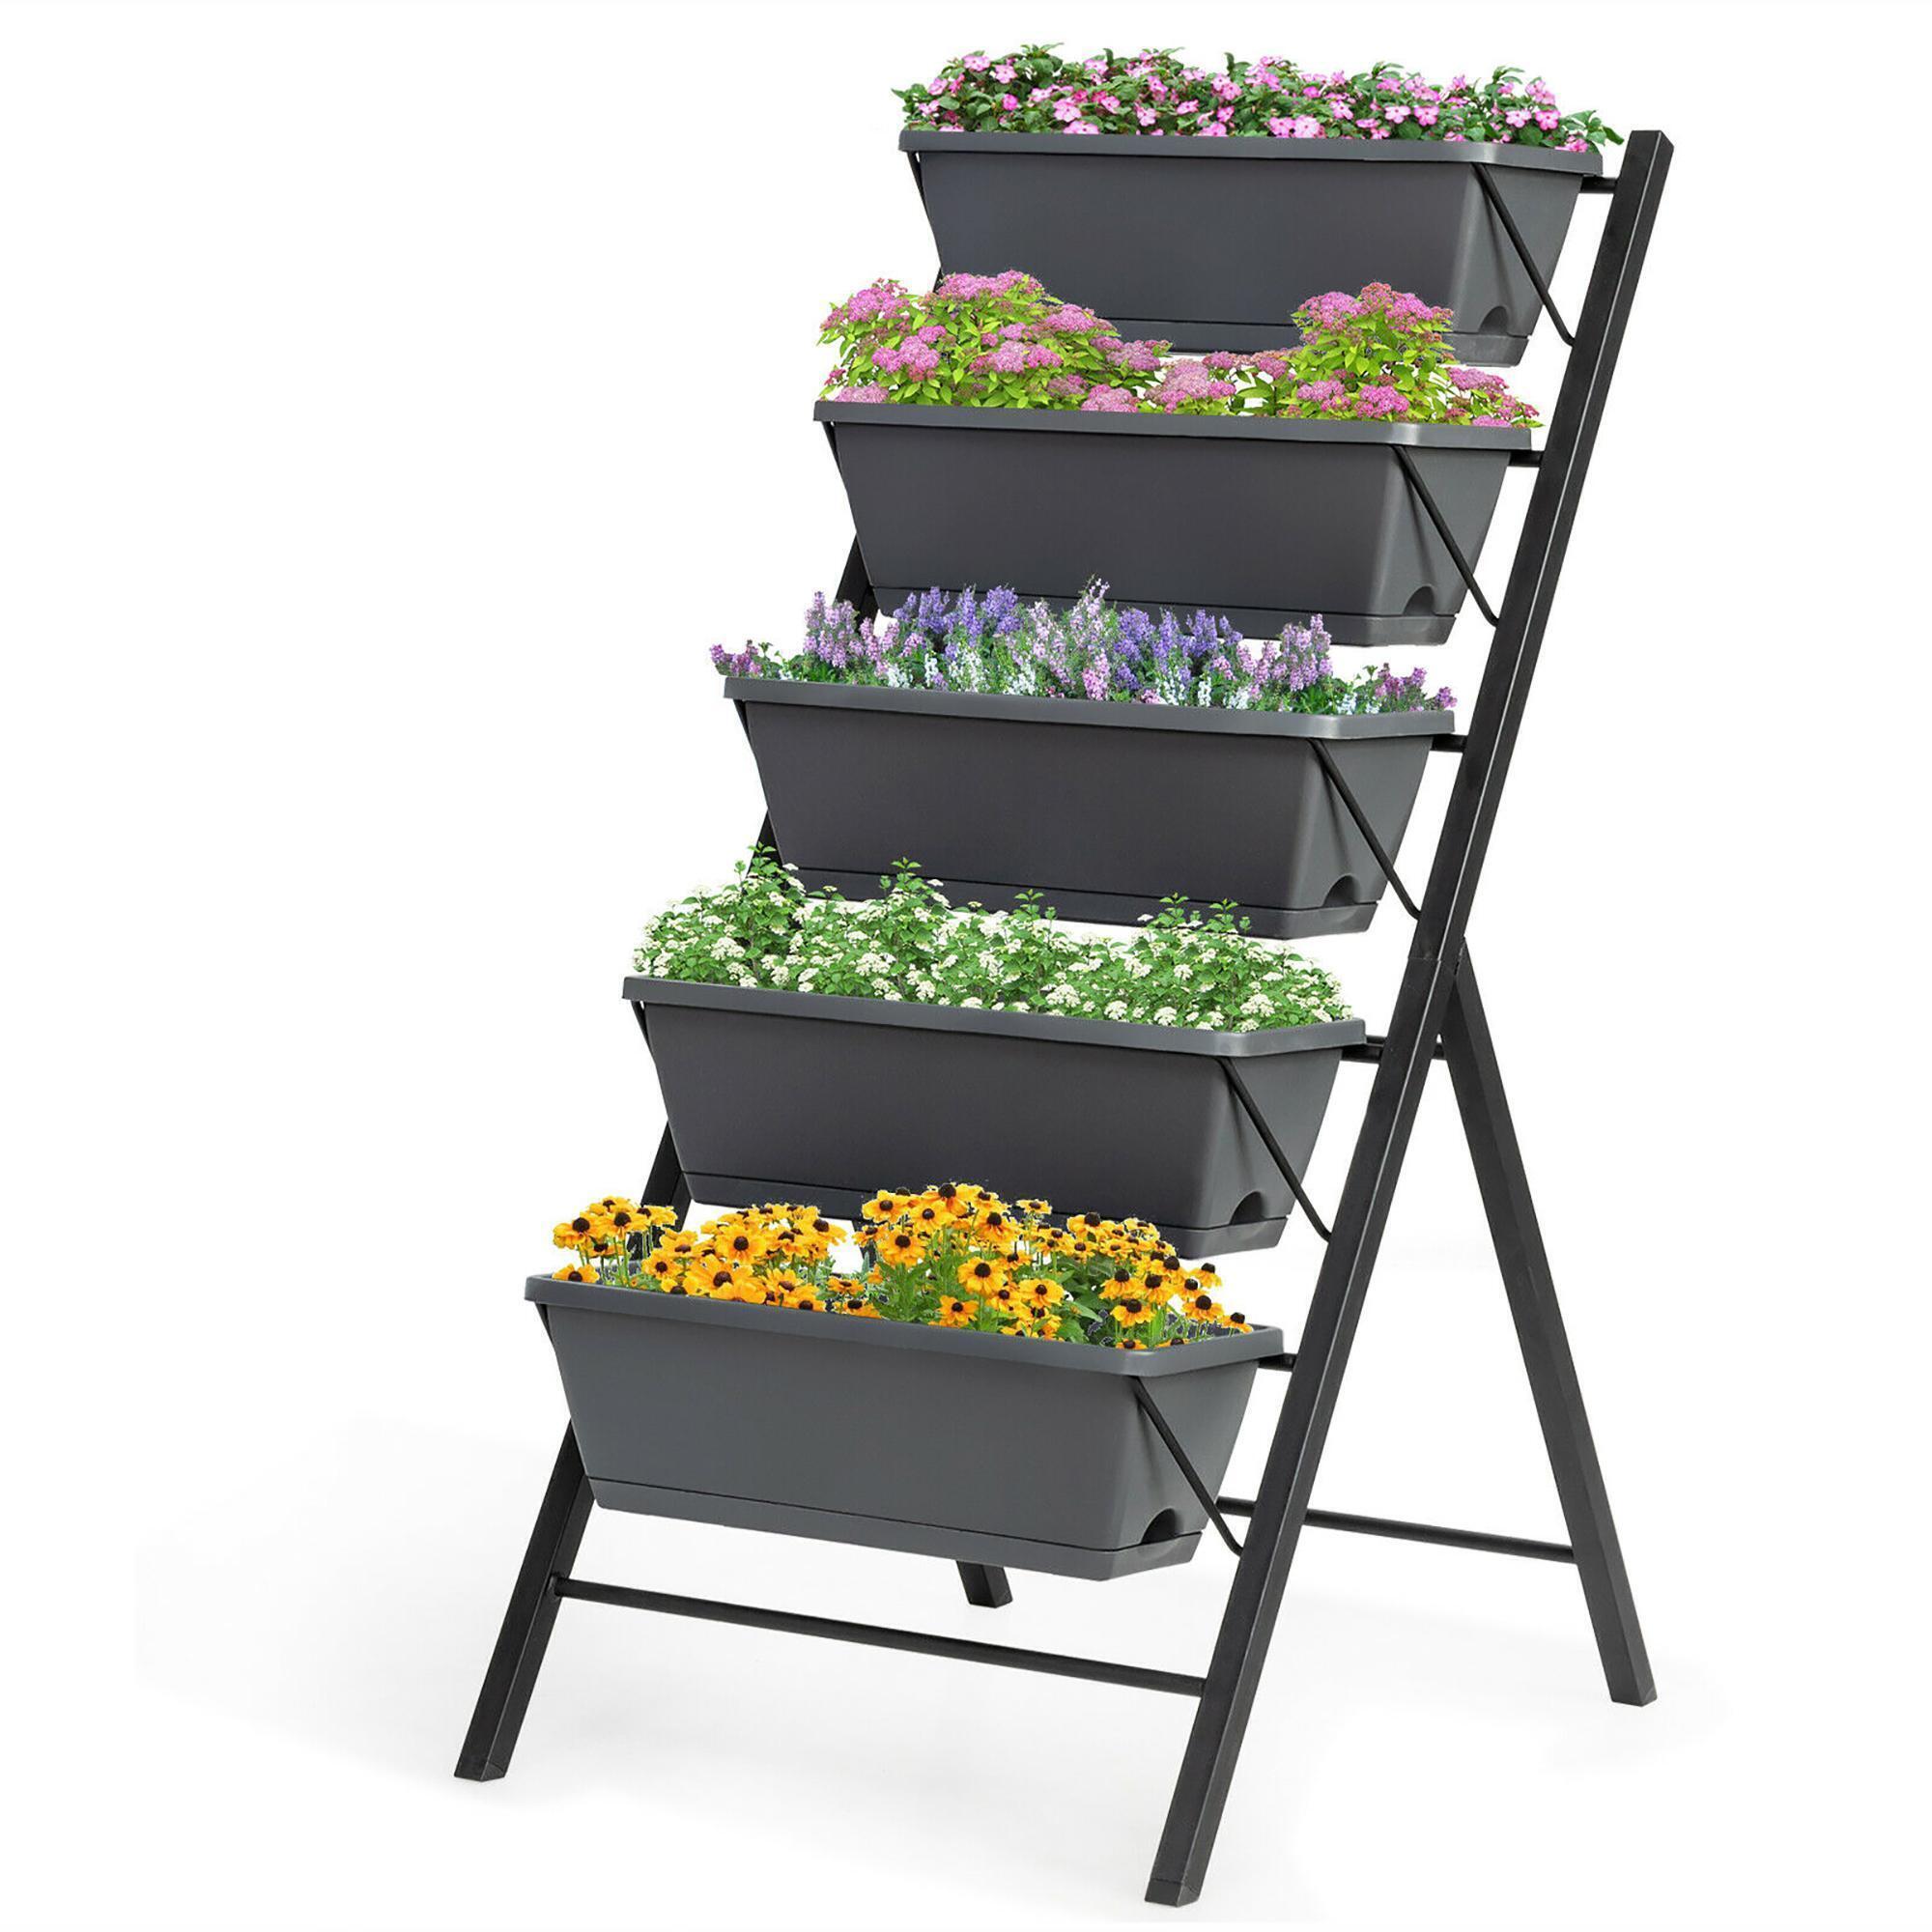 Costway 4 FT Vertical Raised Garden Bed 5-Tier Planter Box for Patio Balcony Flower Herb